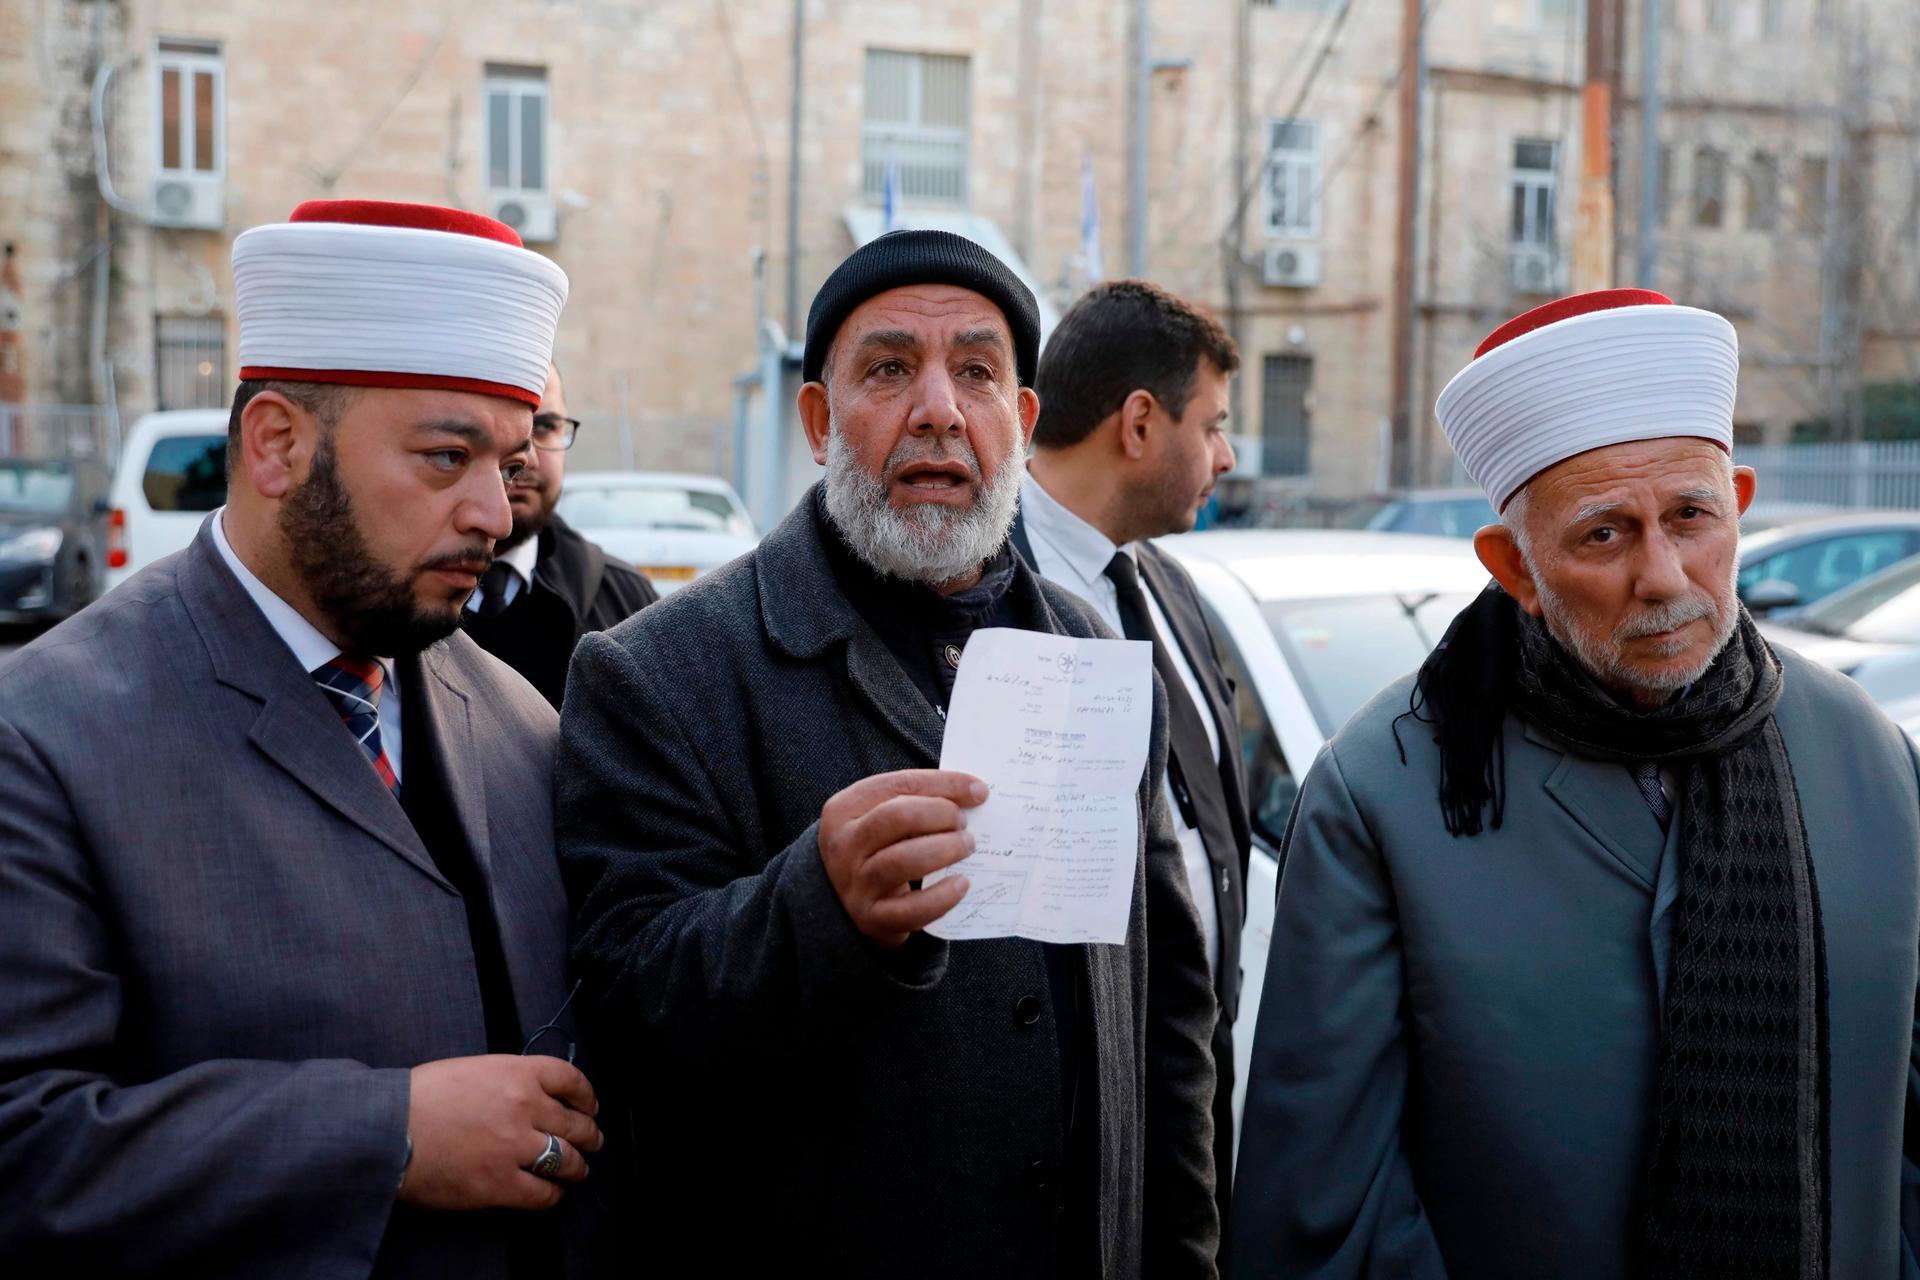 Palestinian head Council of the Waqf Abdel Azeem Salhab (R) and Deputy Director Sheikh Najih Bakirat (C) give a statement after being released from custody in Jerusalem on February 24, 2019. Israeli police said on February 24 they arrested a top Palestinian Muslim official in Jerusalem after scuffles at a flashpoint holy site in the city in the past few days. Israeli police spokesman Micky Rosenfeld said Abdel Azeem Salhab had been arrested for violating an order preventing entry into a prohibited area of the al-Aqsa compound. Salhab, the head of the council of the Waqf in Jerusalem, the religious authority that governs the site, have since been released among others with an order not to visit the holy site. / AFP / AHMAD GHARABLI
